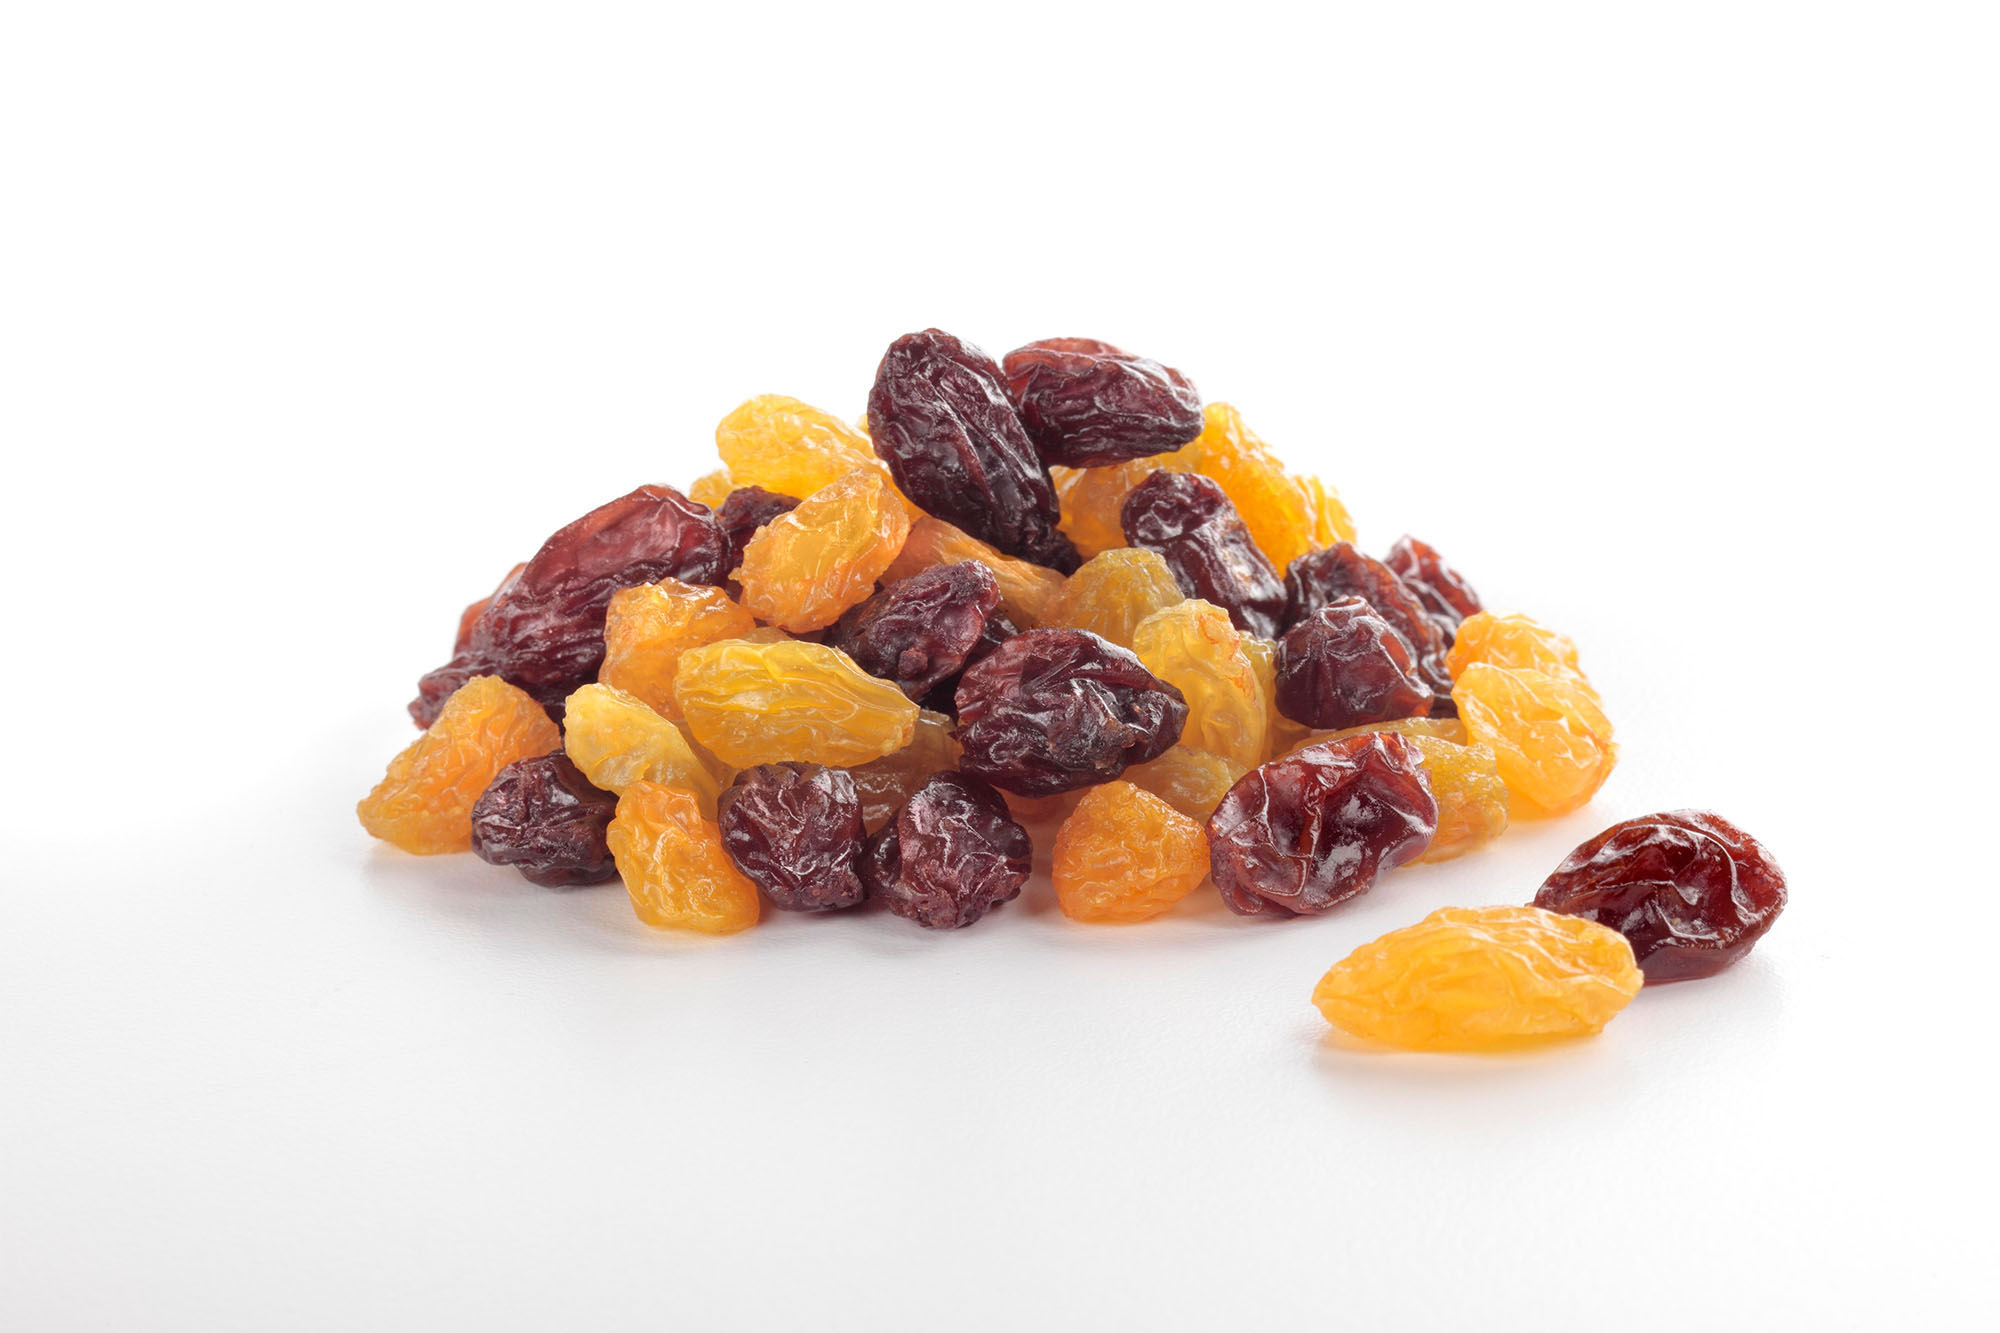 New Study: Snacking on Raisins Controls Hunger, Promotes Satiety